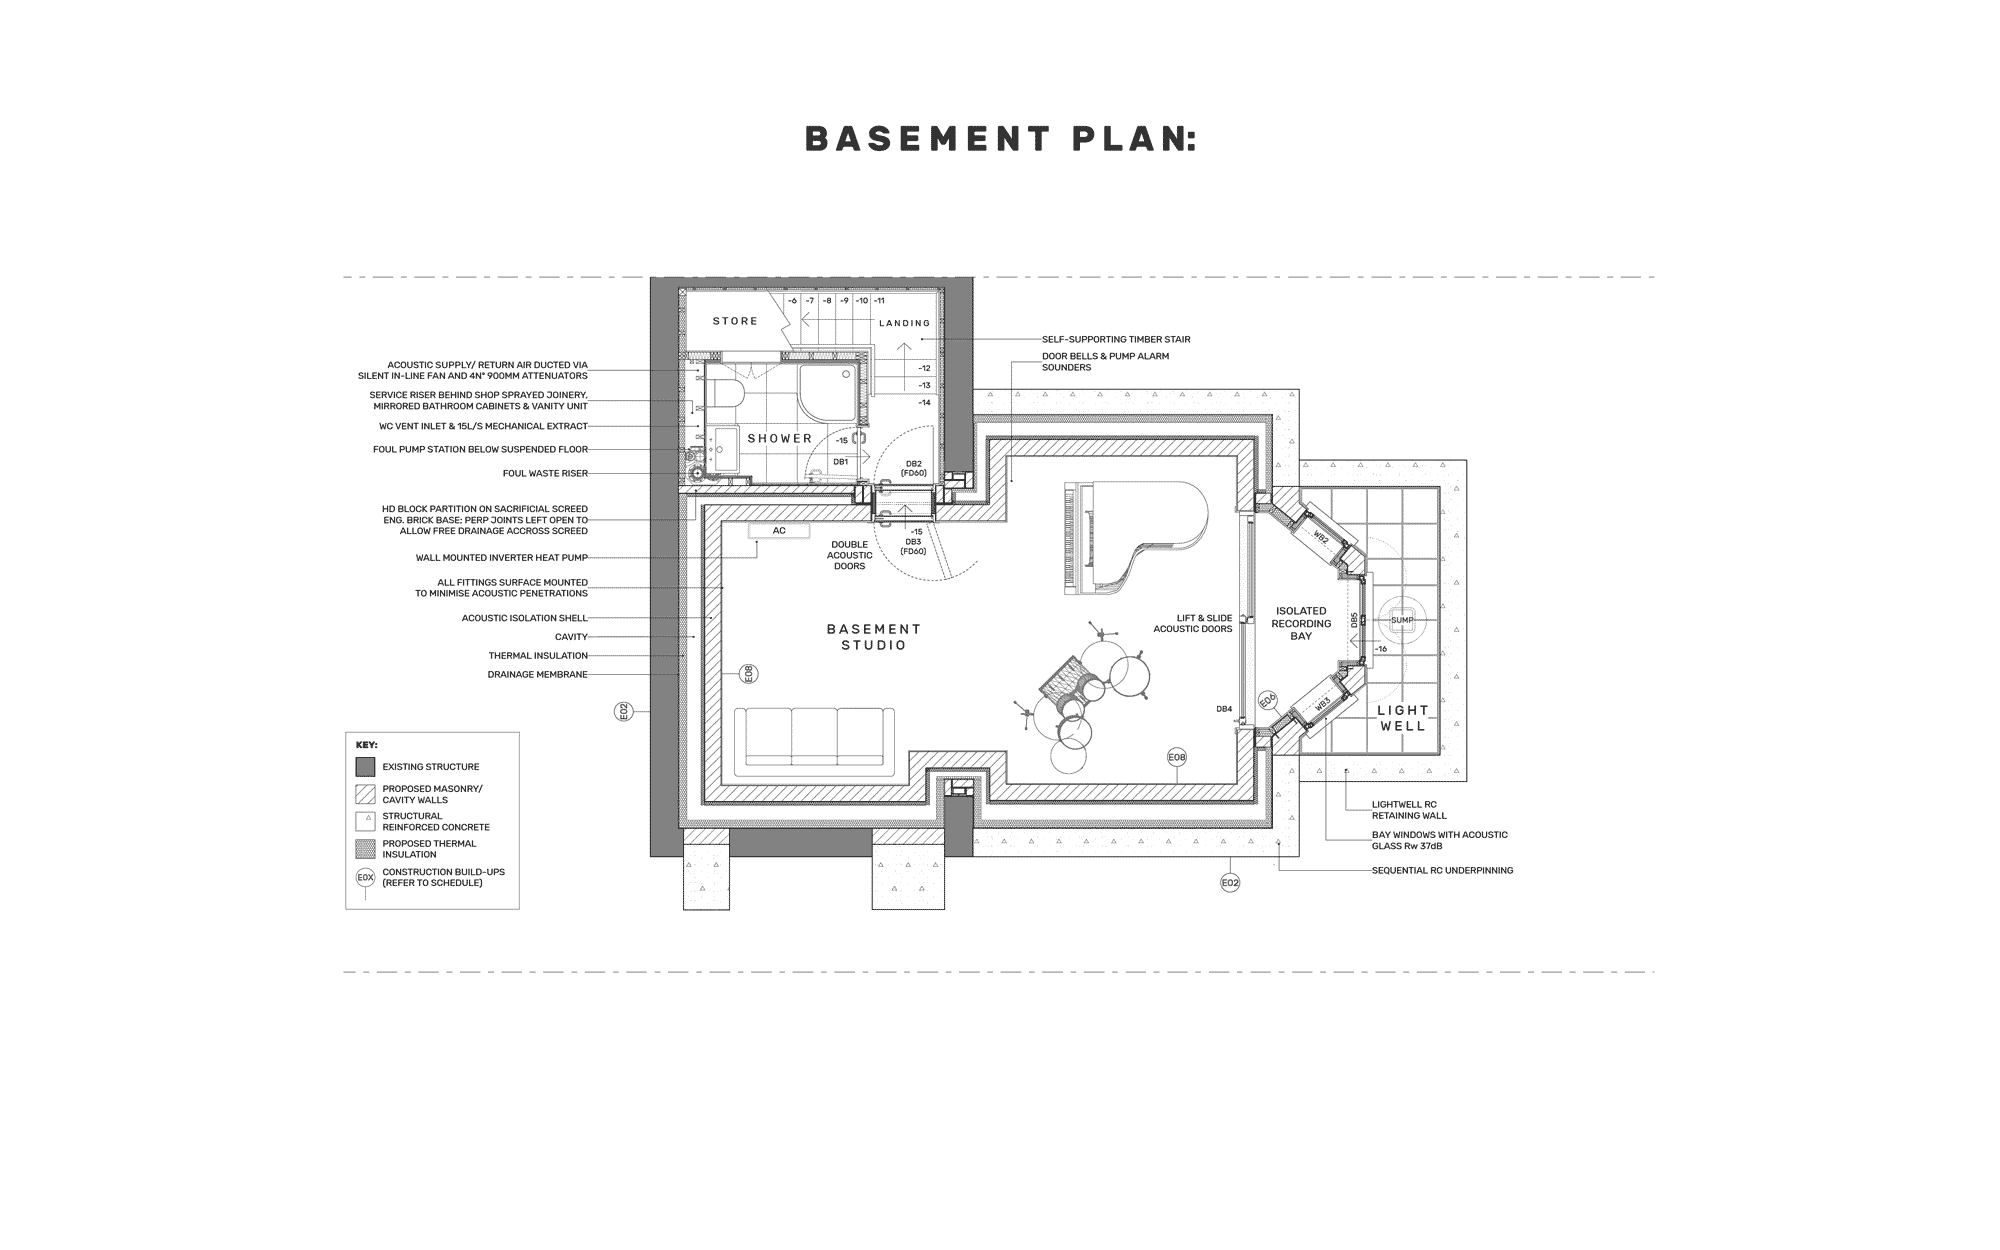 1 to 50 floor plan of basement recording studio and shower room under Victorian house